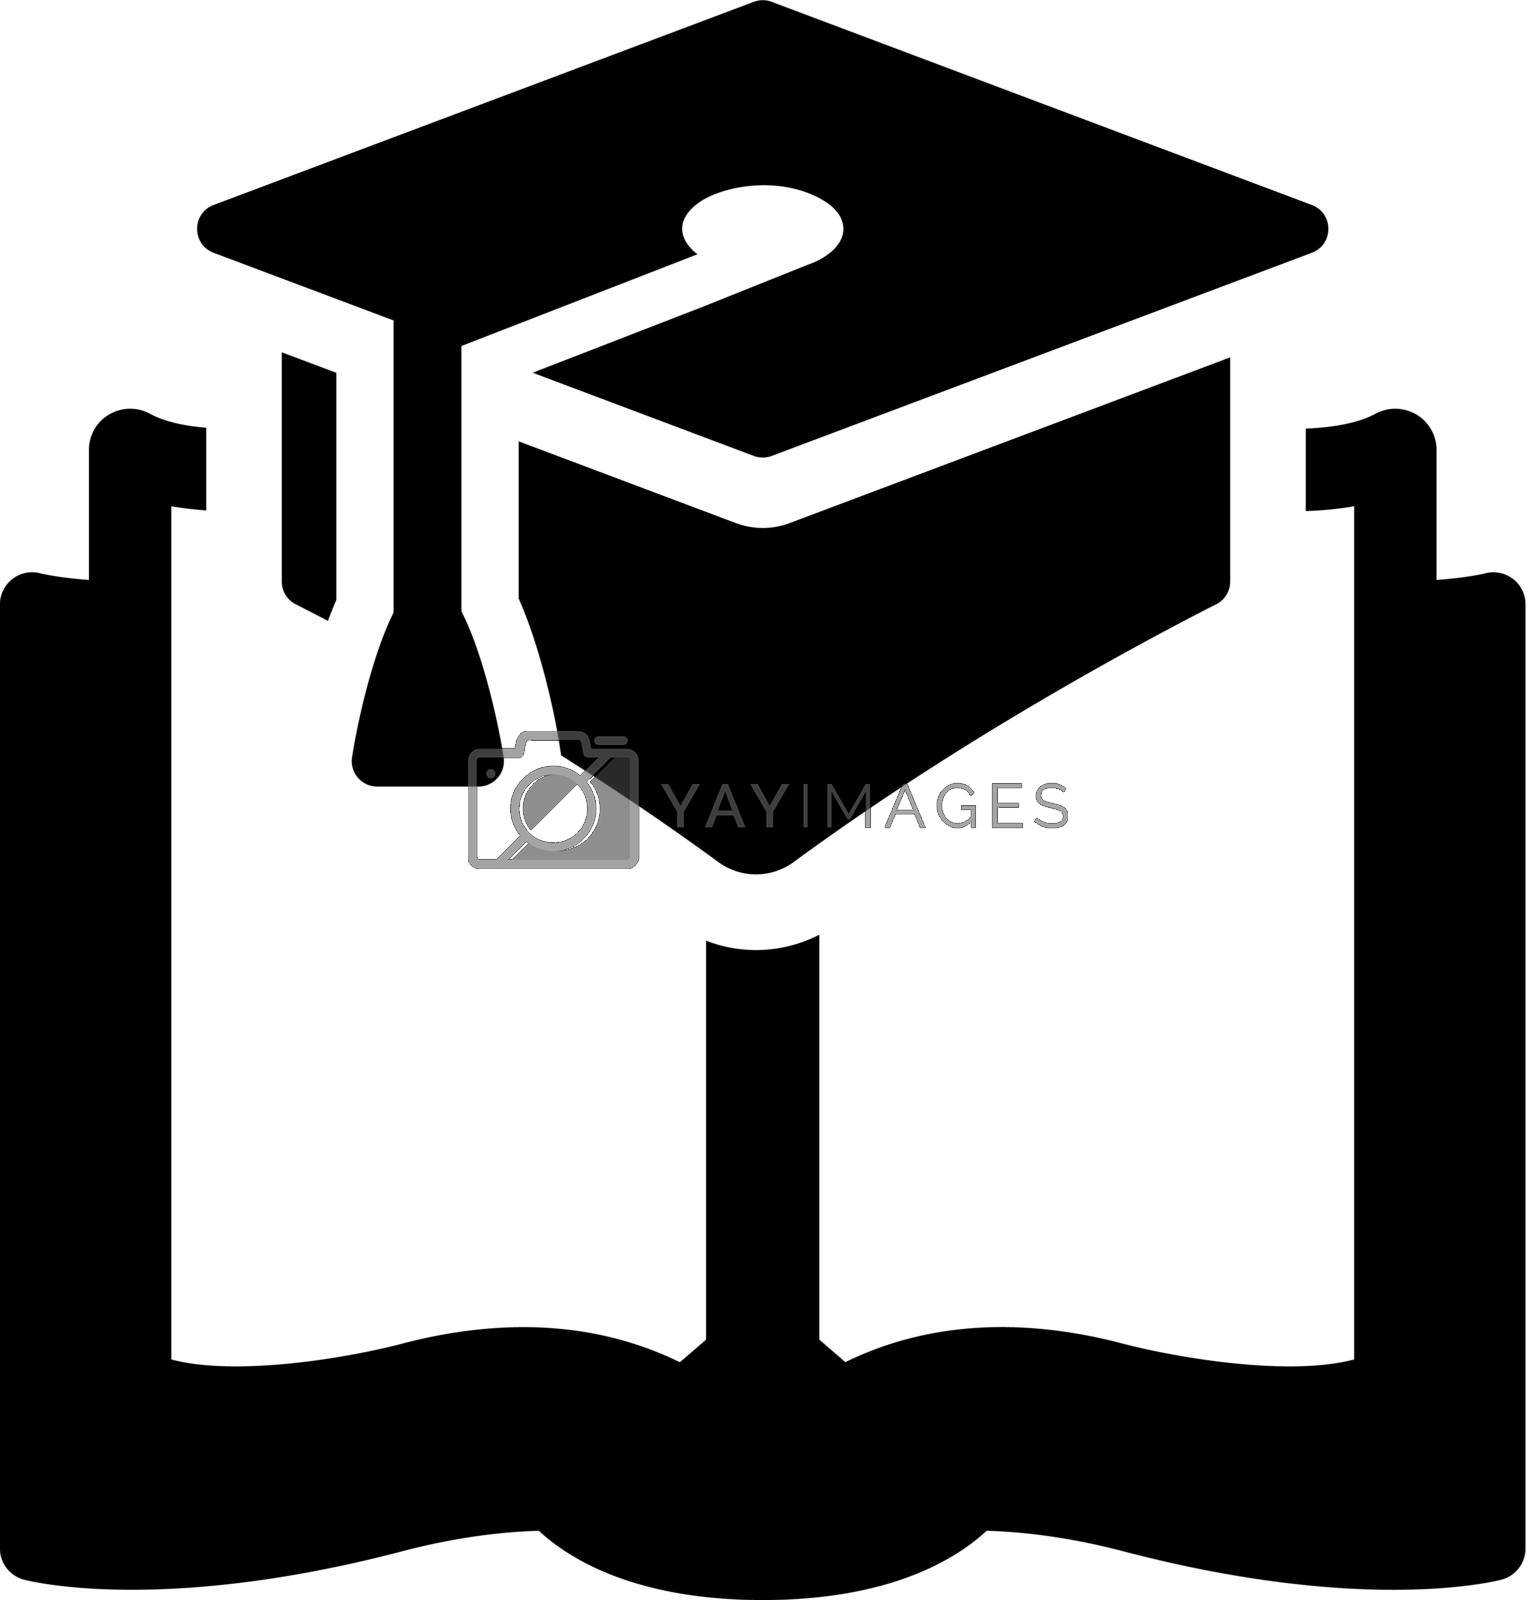 Royalty free image of Higher education icon by delwar018